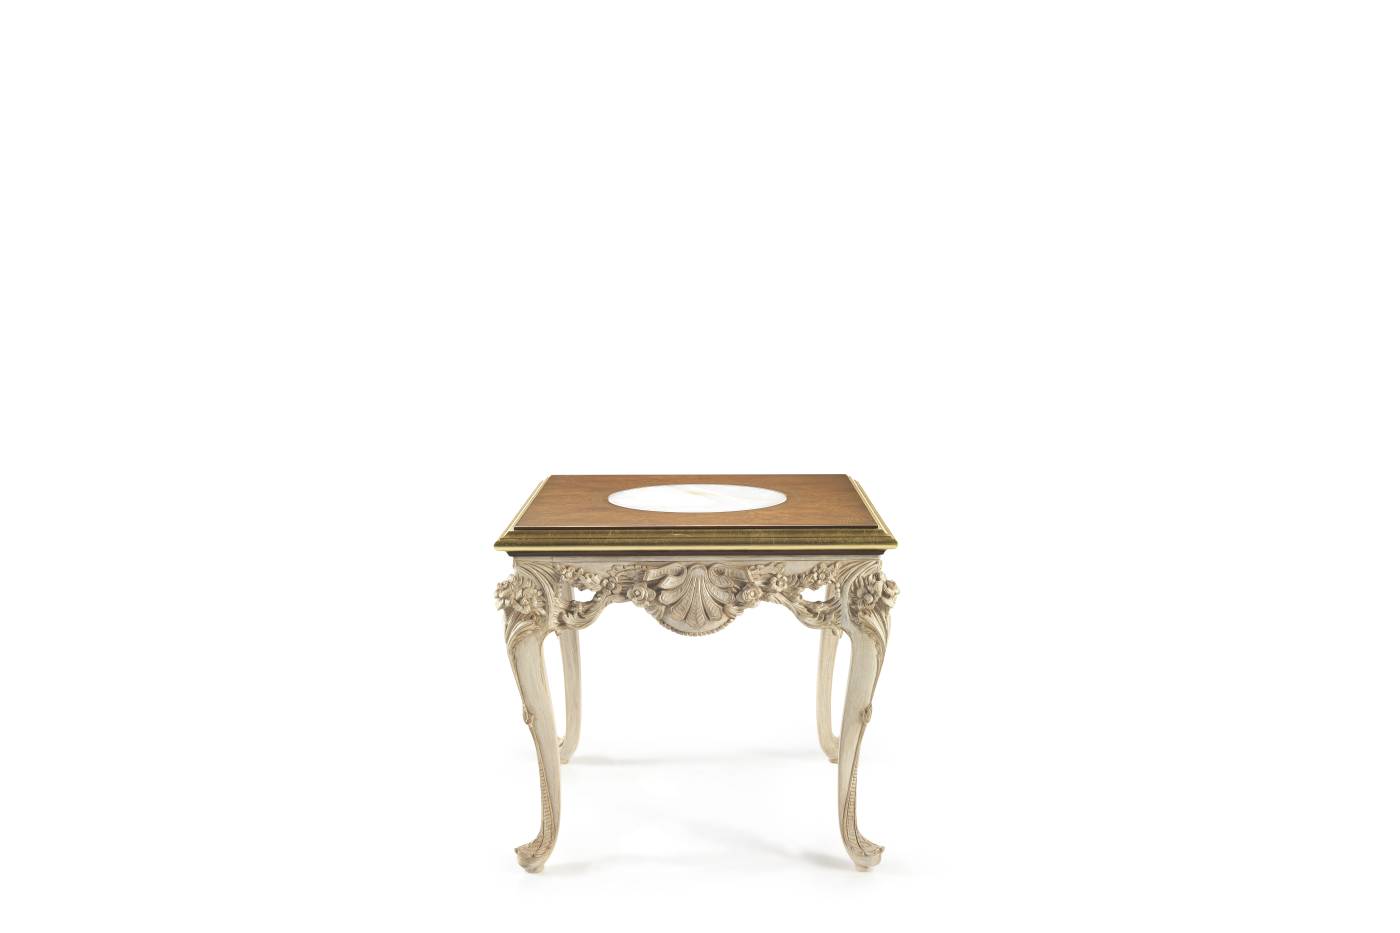 LA GRANDE DAME low table - Bespoke projects with luxury Made in Italy classic furniture